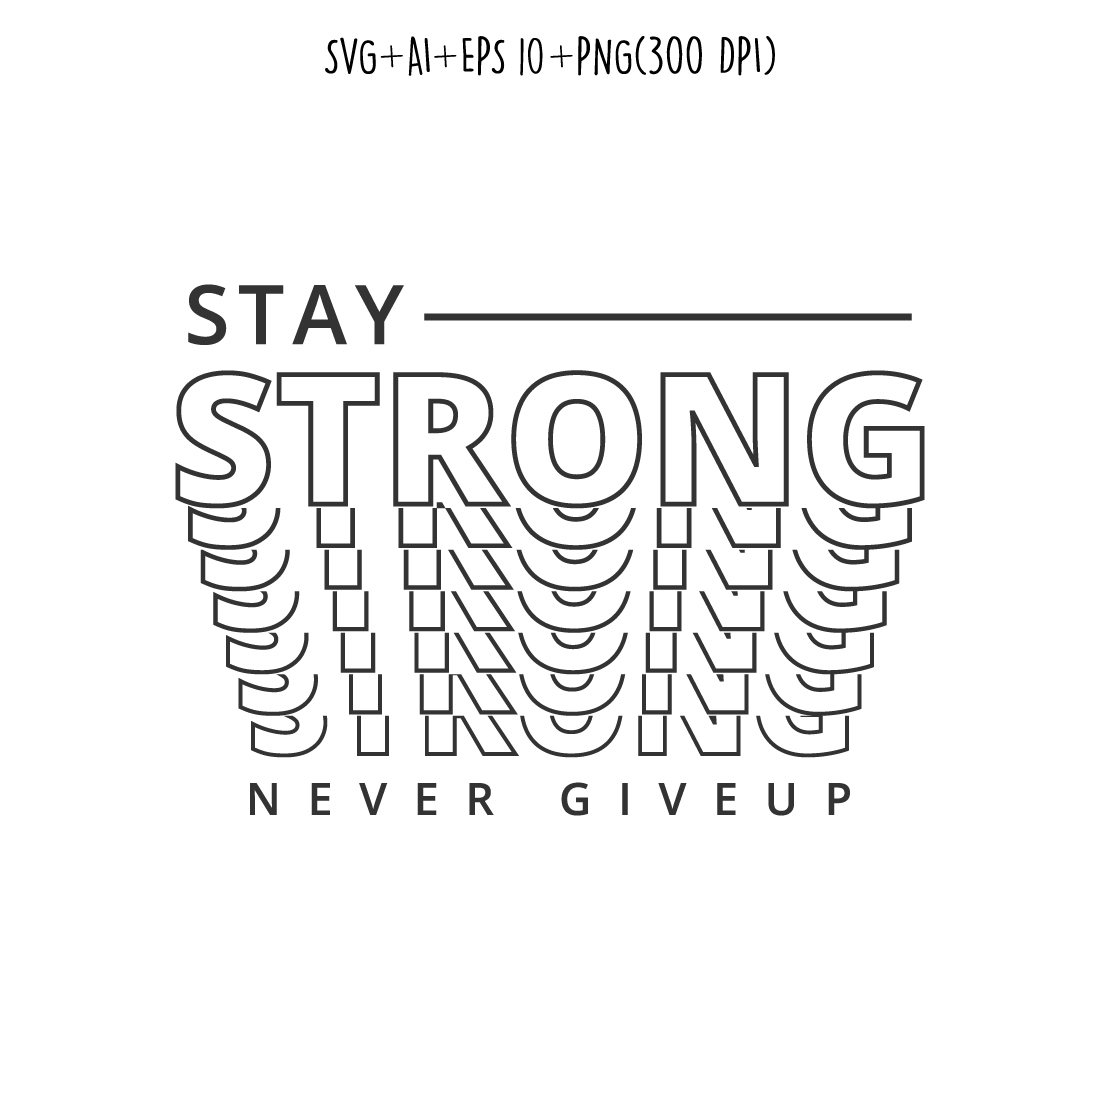 Stay strong never give up motivational quote typography urban style t-shirt design for t-shirts, cards, frame artwork, phone cases, bags, mugs, stickers, tumblers, print, etc cover image.